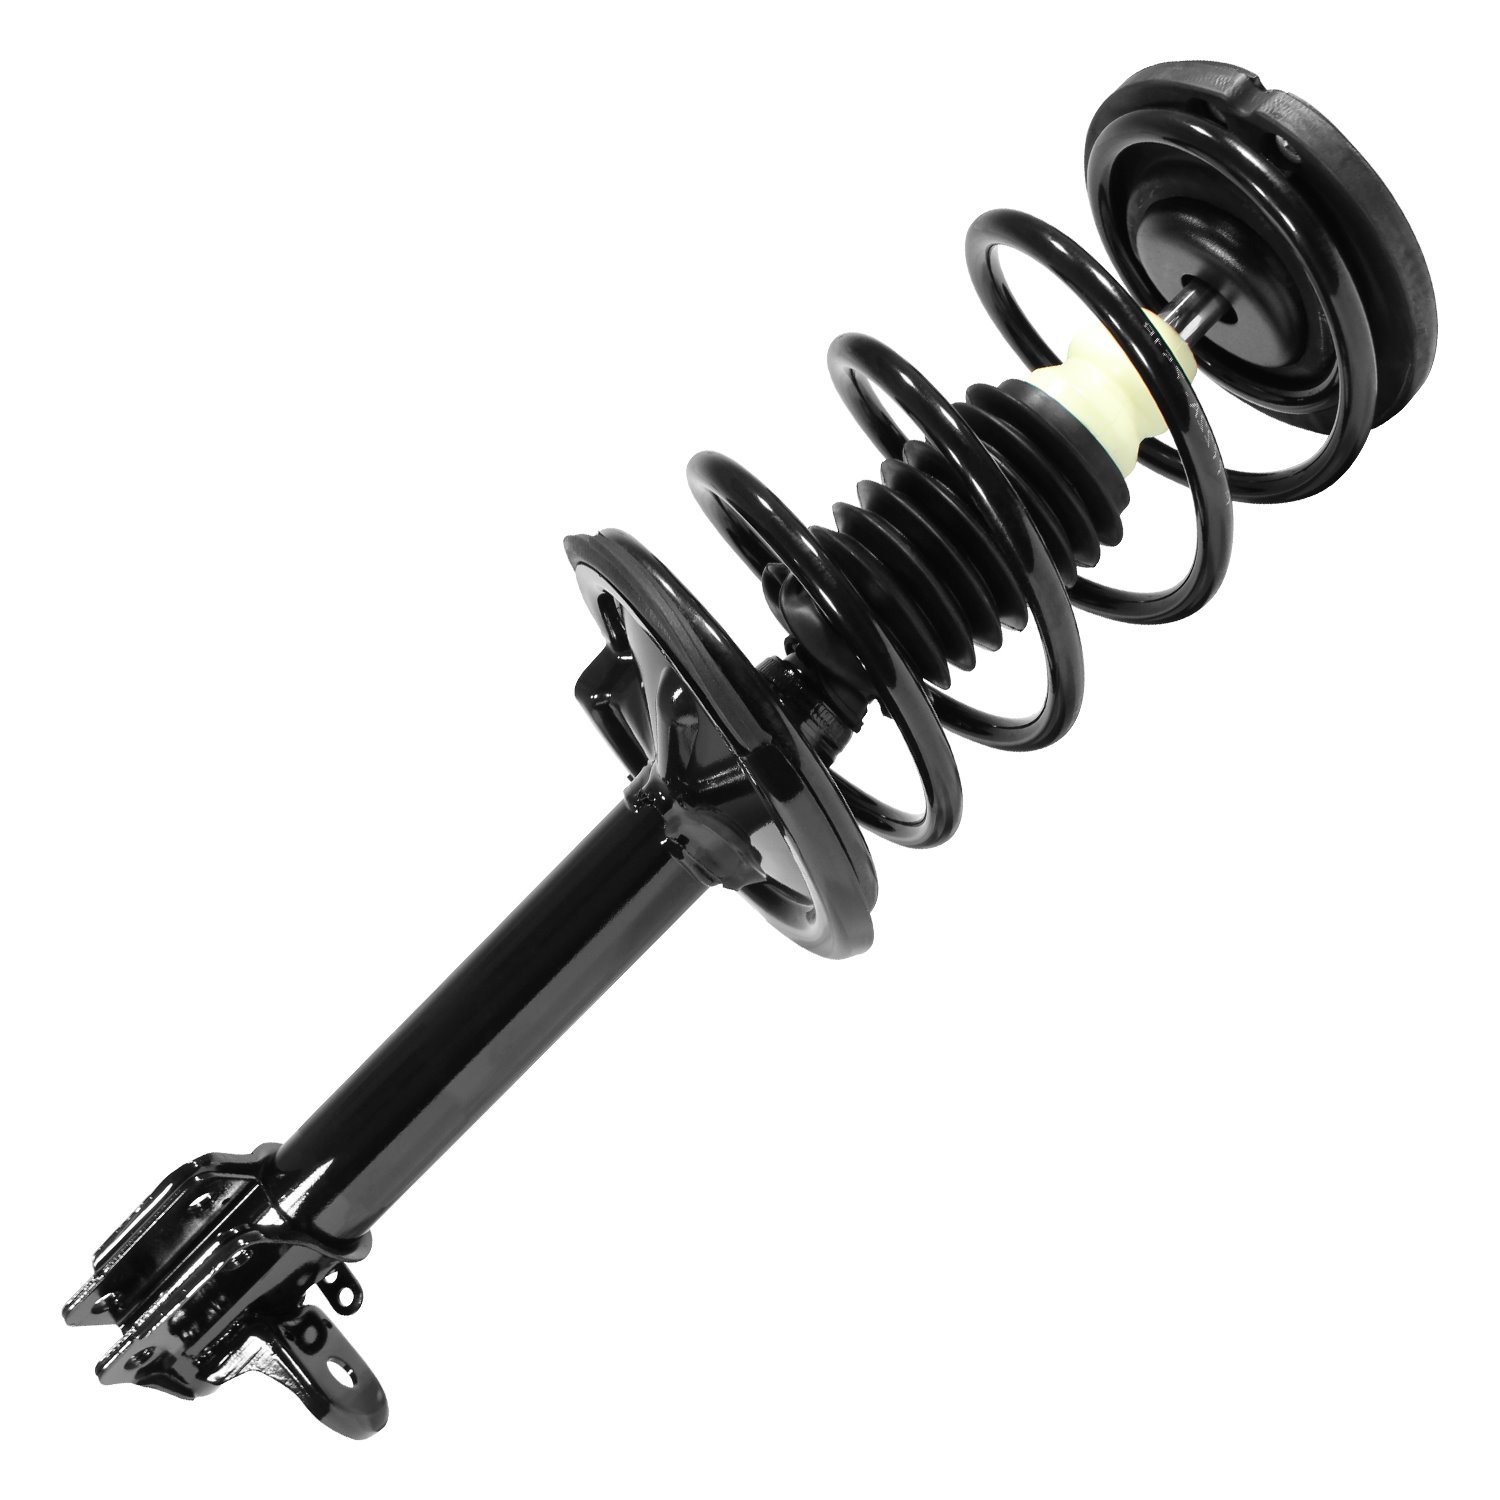 15211 Suspension Strut & Coil Spring Assembly Fits Select Chrysler Neon, Dodge Neon, Dodge SX 2.0, Plymouth Neon